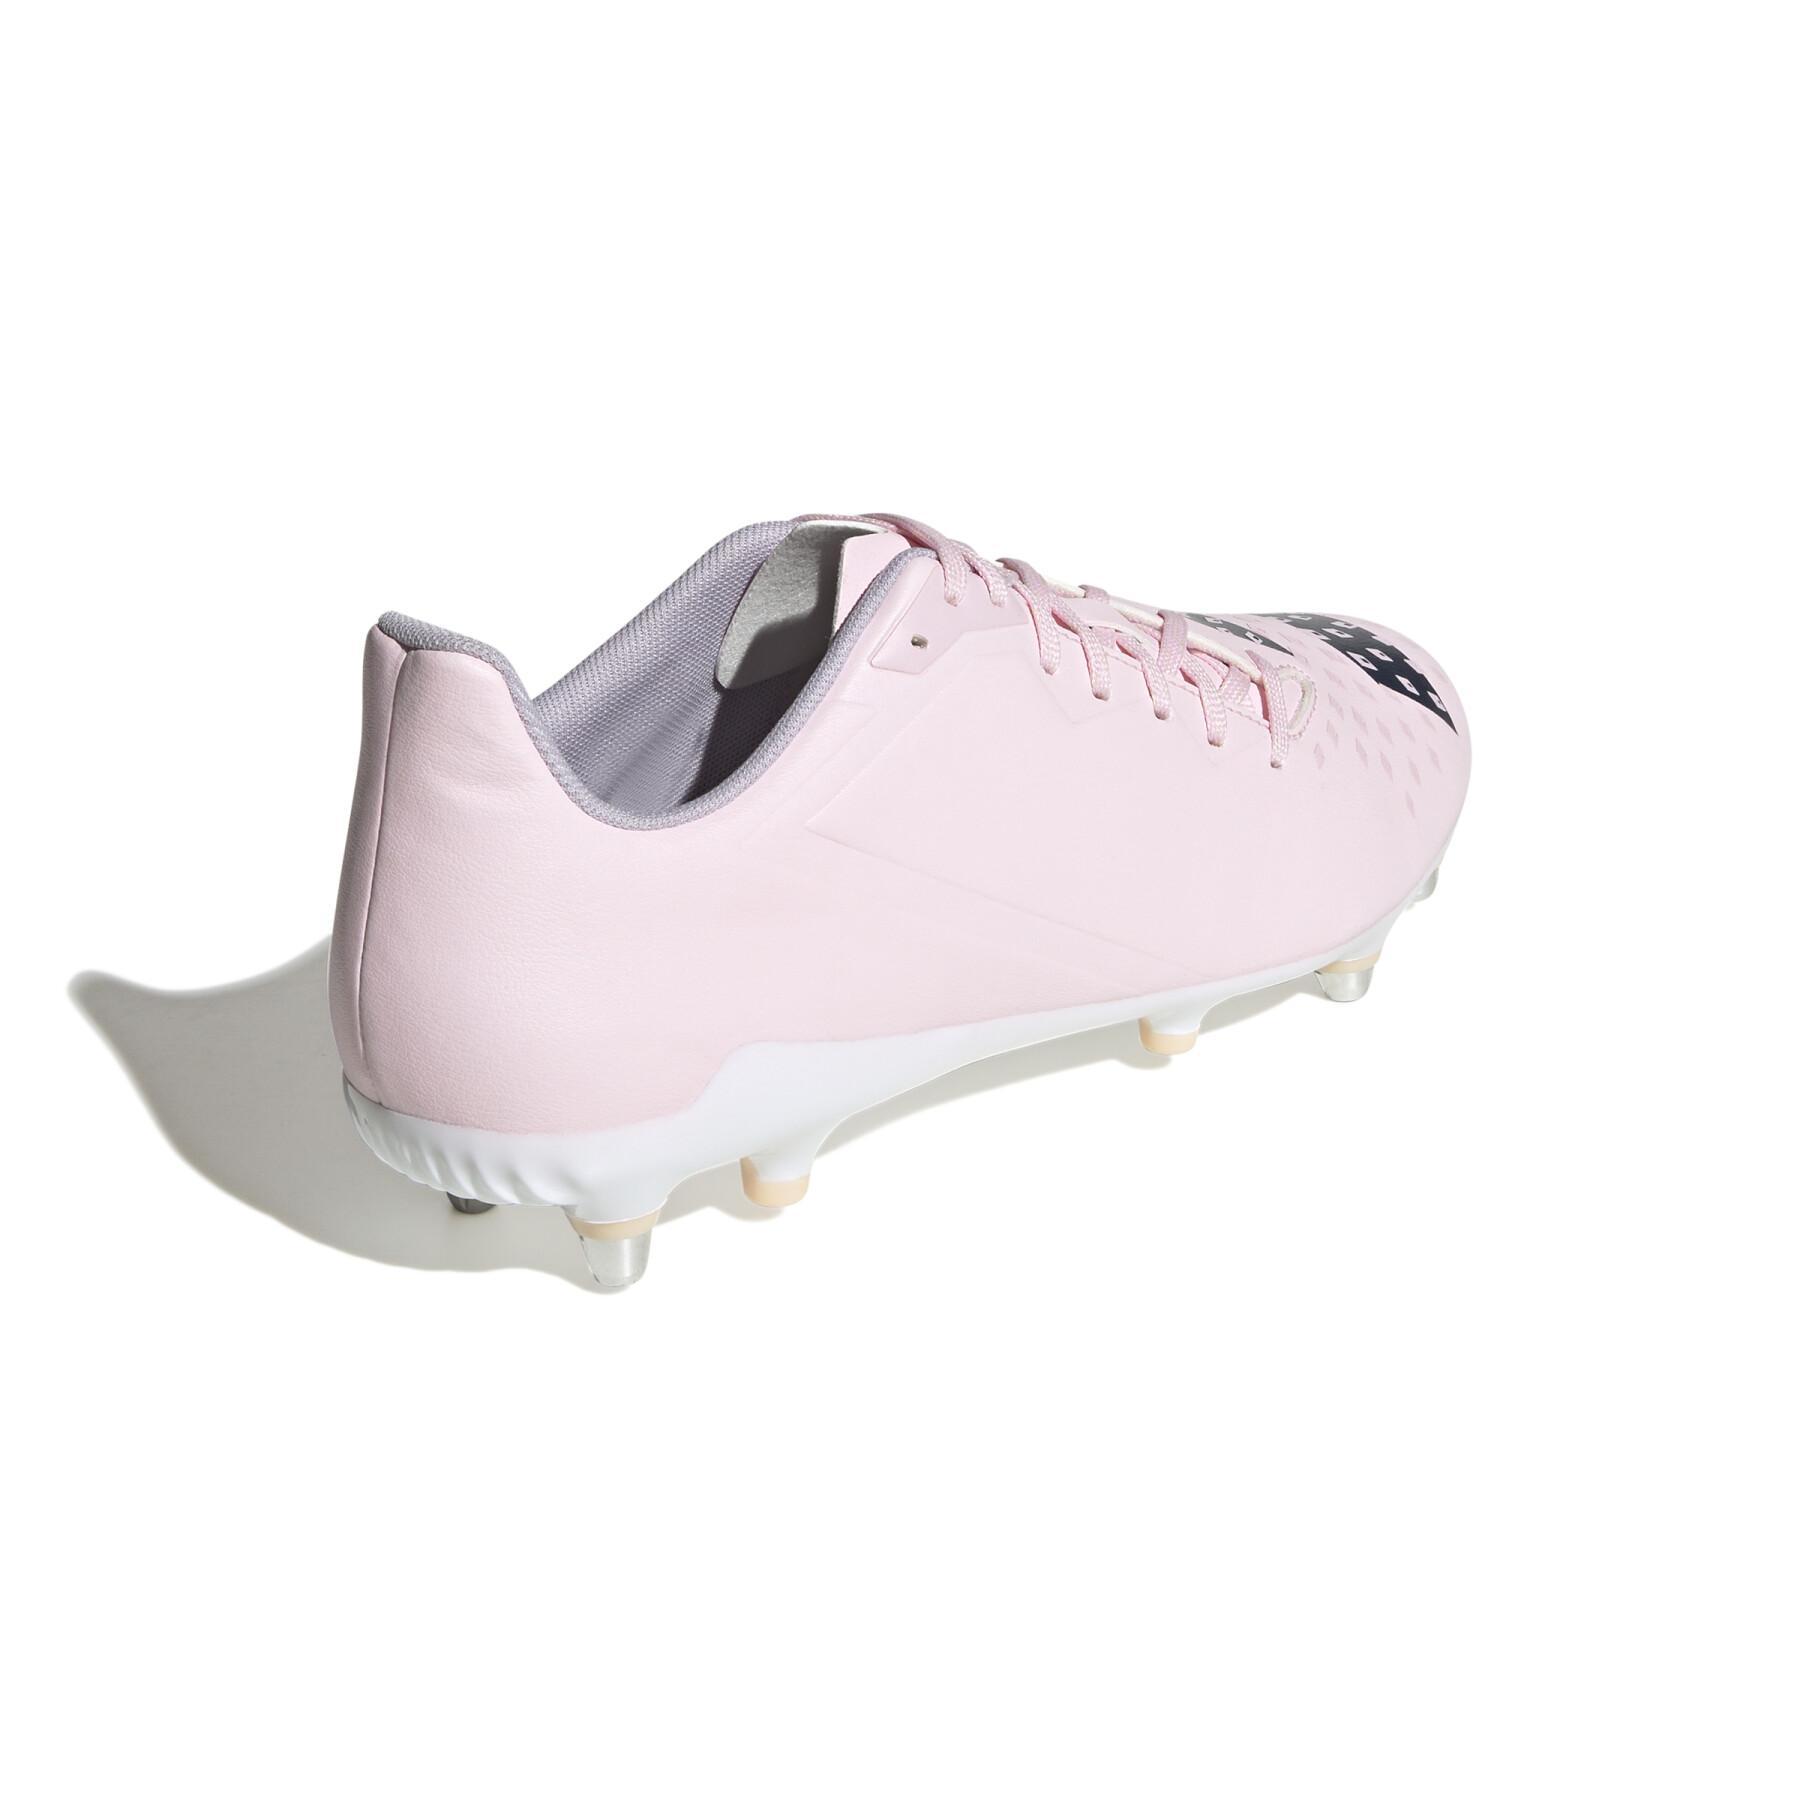 Chaussures de rugby adidas Malice FG